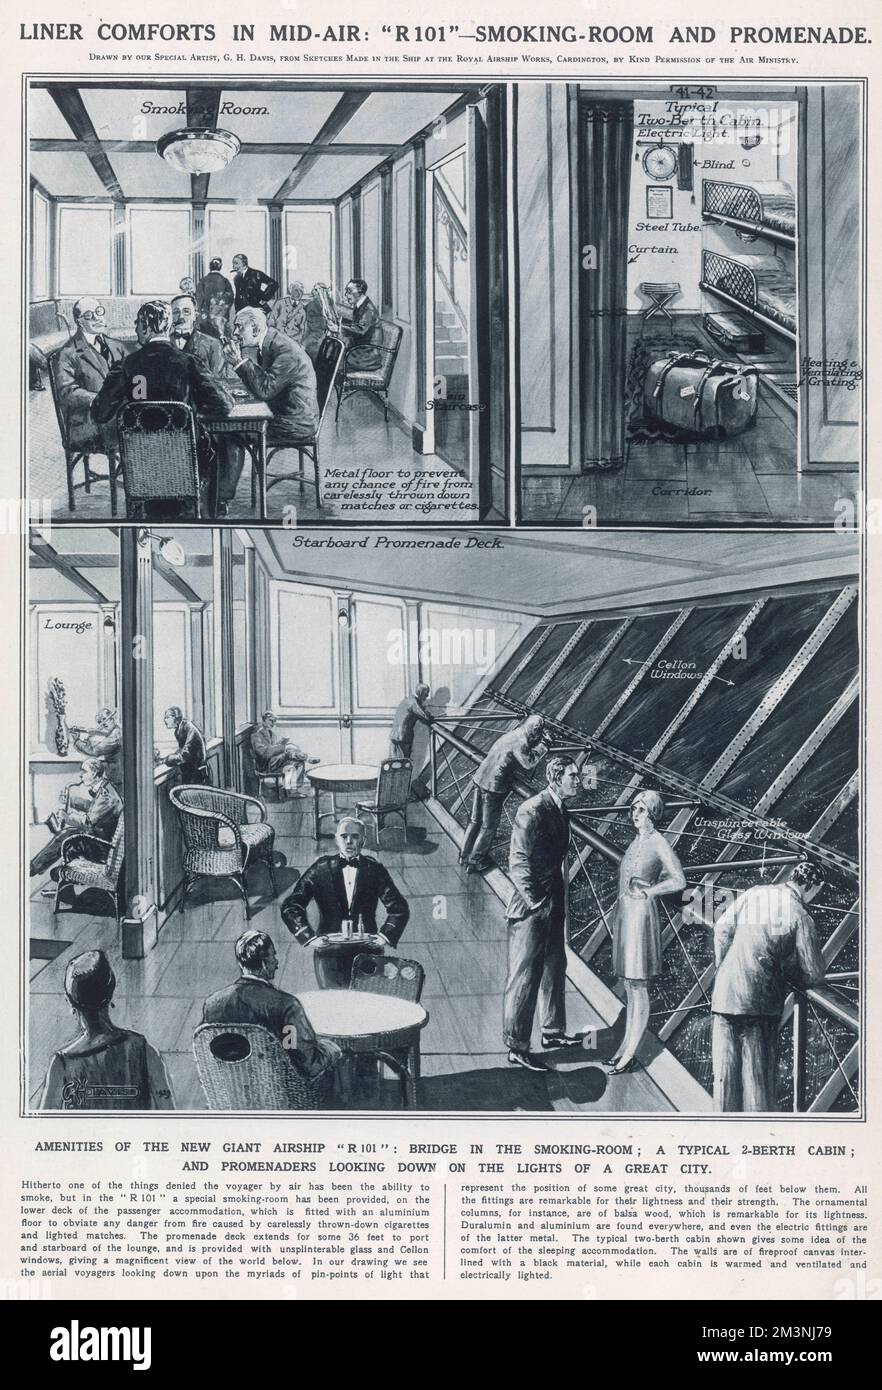 Amenities of the giant British airship R101, showing the smoking room, a typical two-berth cabin, and passengers looking down on the lights of a city from the starboard promenade deck. The Illustrated London News explains that 'a special smoking room has been provided...which is fitted with an aluminium floor to obviate any danger from fire caused by carelessly thrown-down cigarettes and lighted matches.' The fireproofing didn't stop the R101 crashing in the early hours of 5th October 1930 on its maiden voyage and bursting into flames, with the eventual loss of 48 of 54 lives on board.  192 Stock Photo